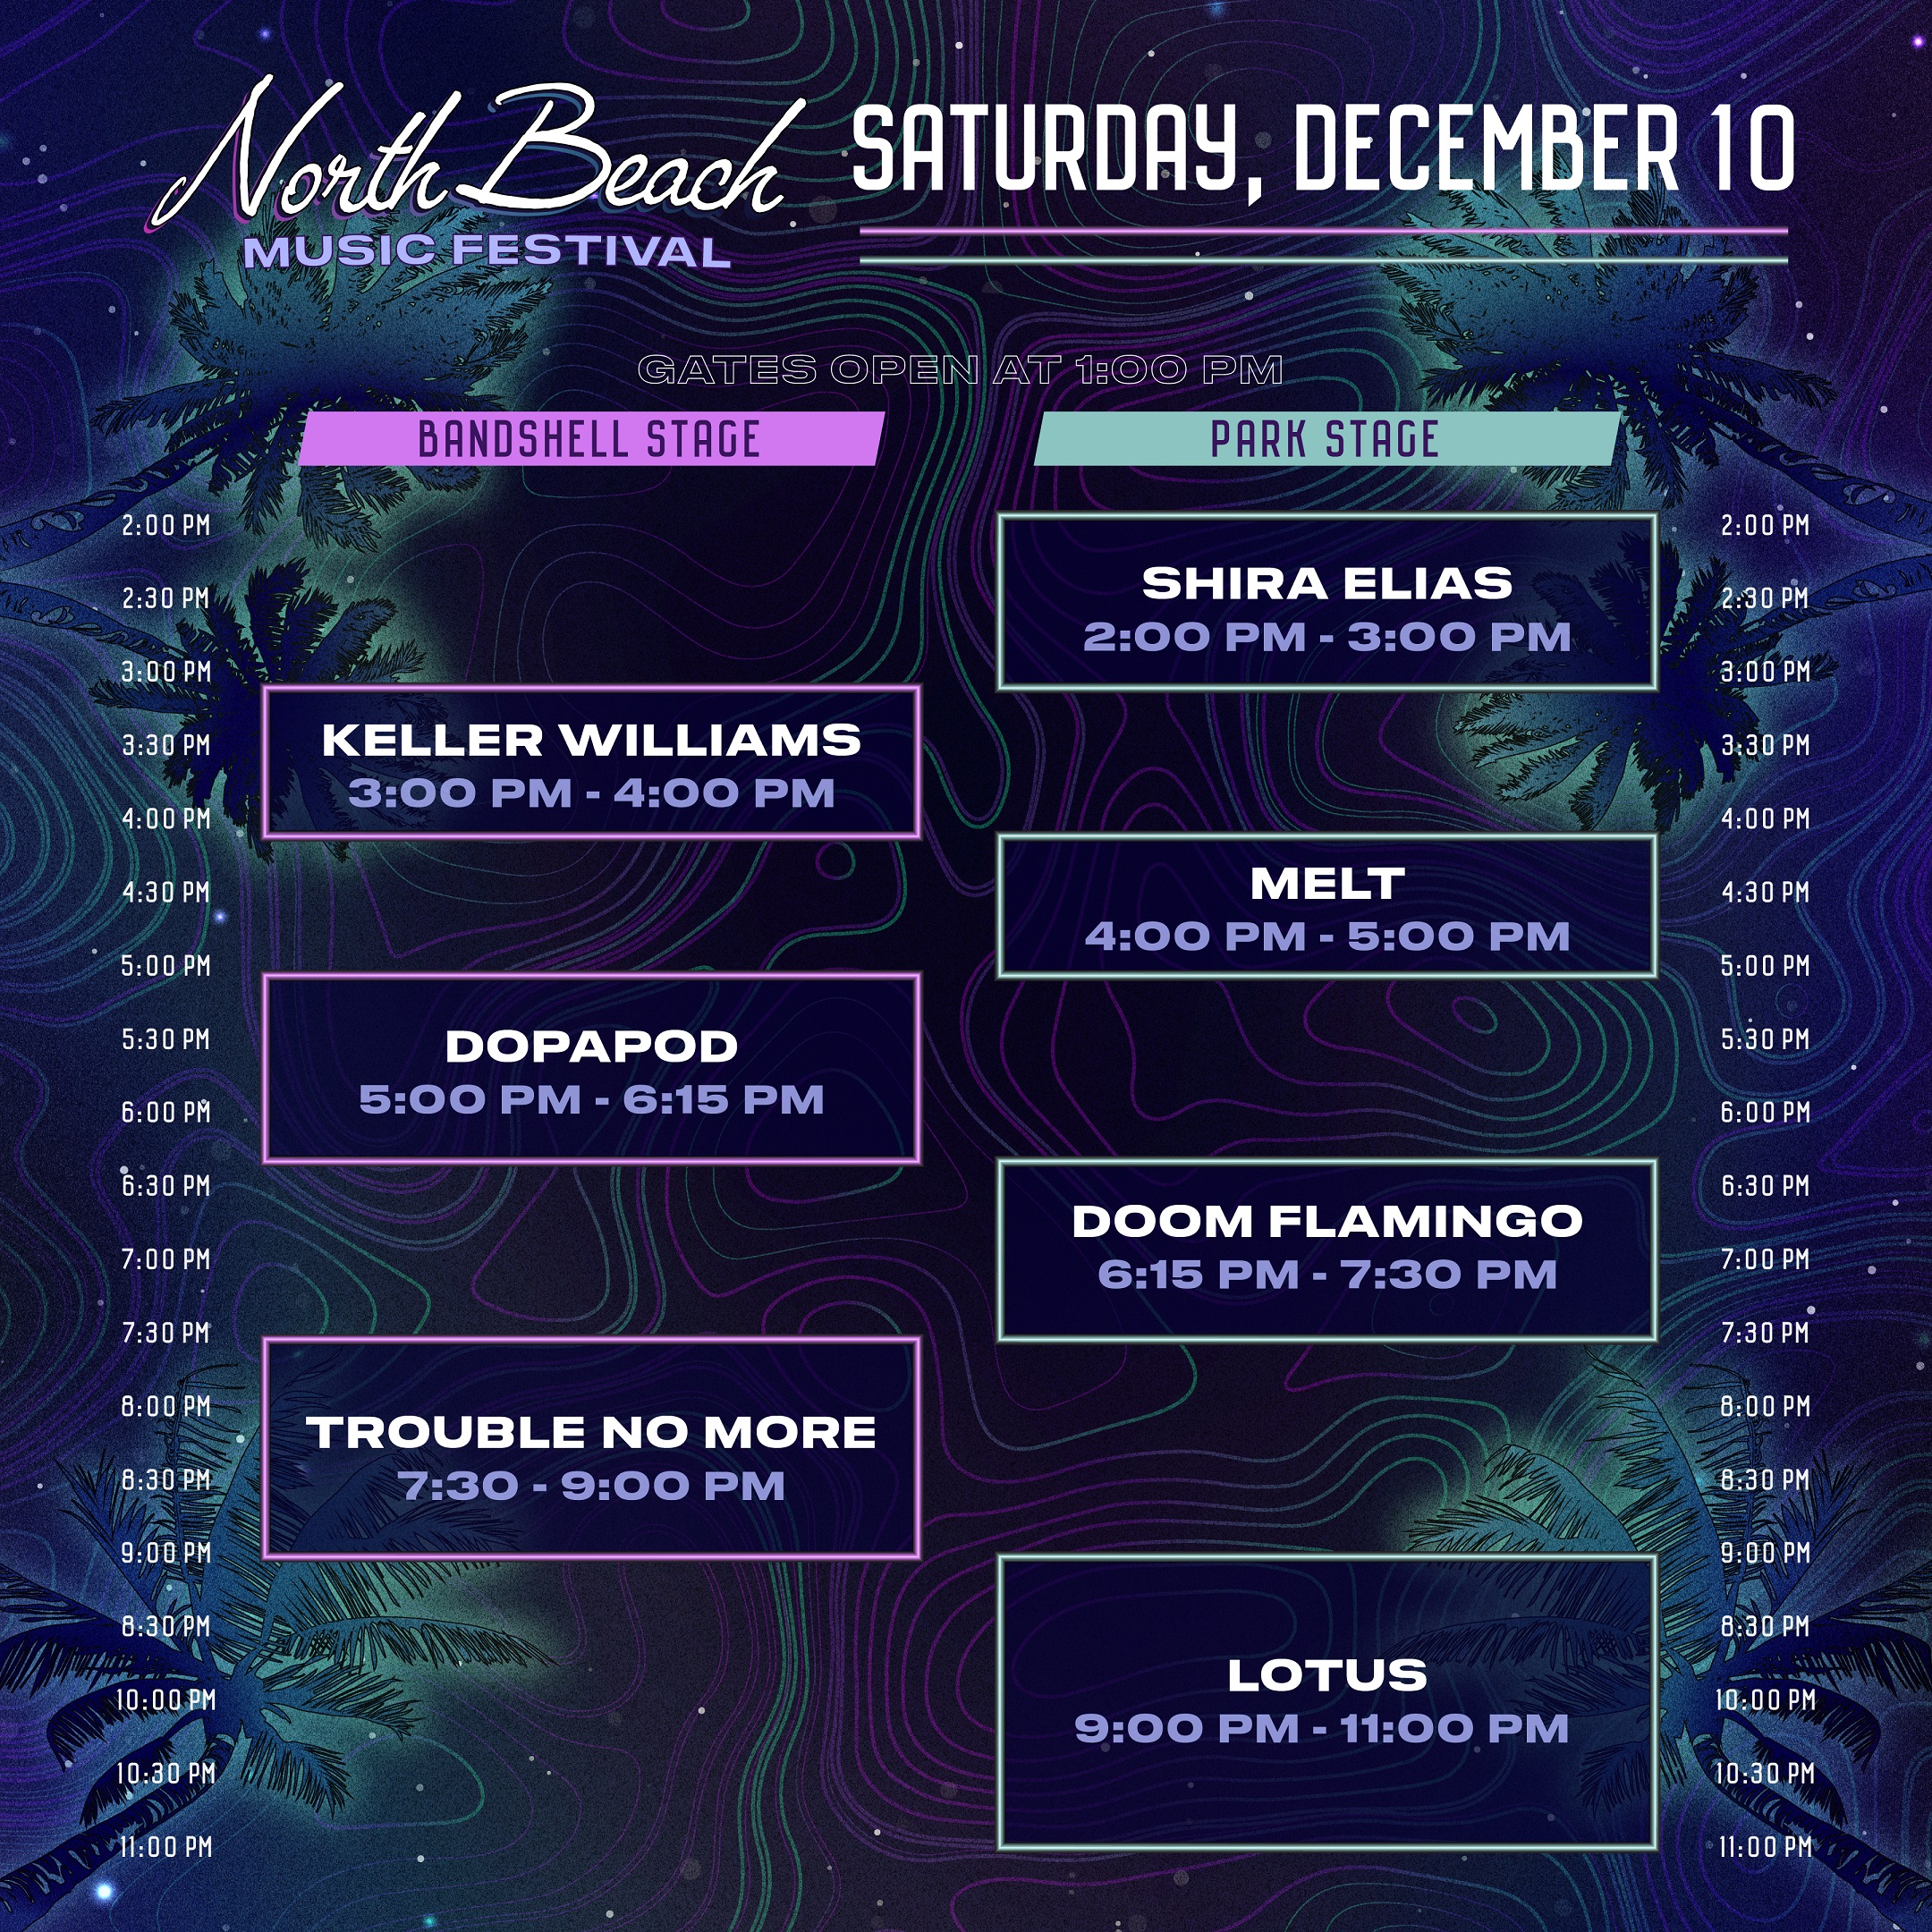  NORTH BEACH MUSIC FESTIVAL SHARES DAILY SCHEDULE & ANNOUNCES SKERIK AS THE 2022 ARTIST-AT-LARGE